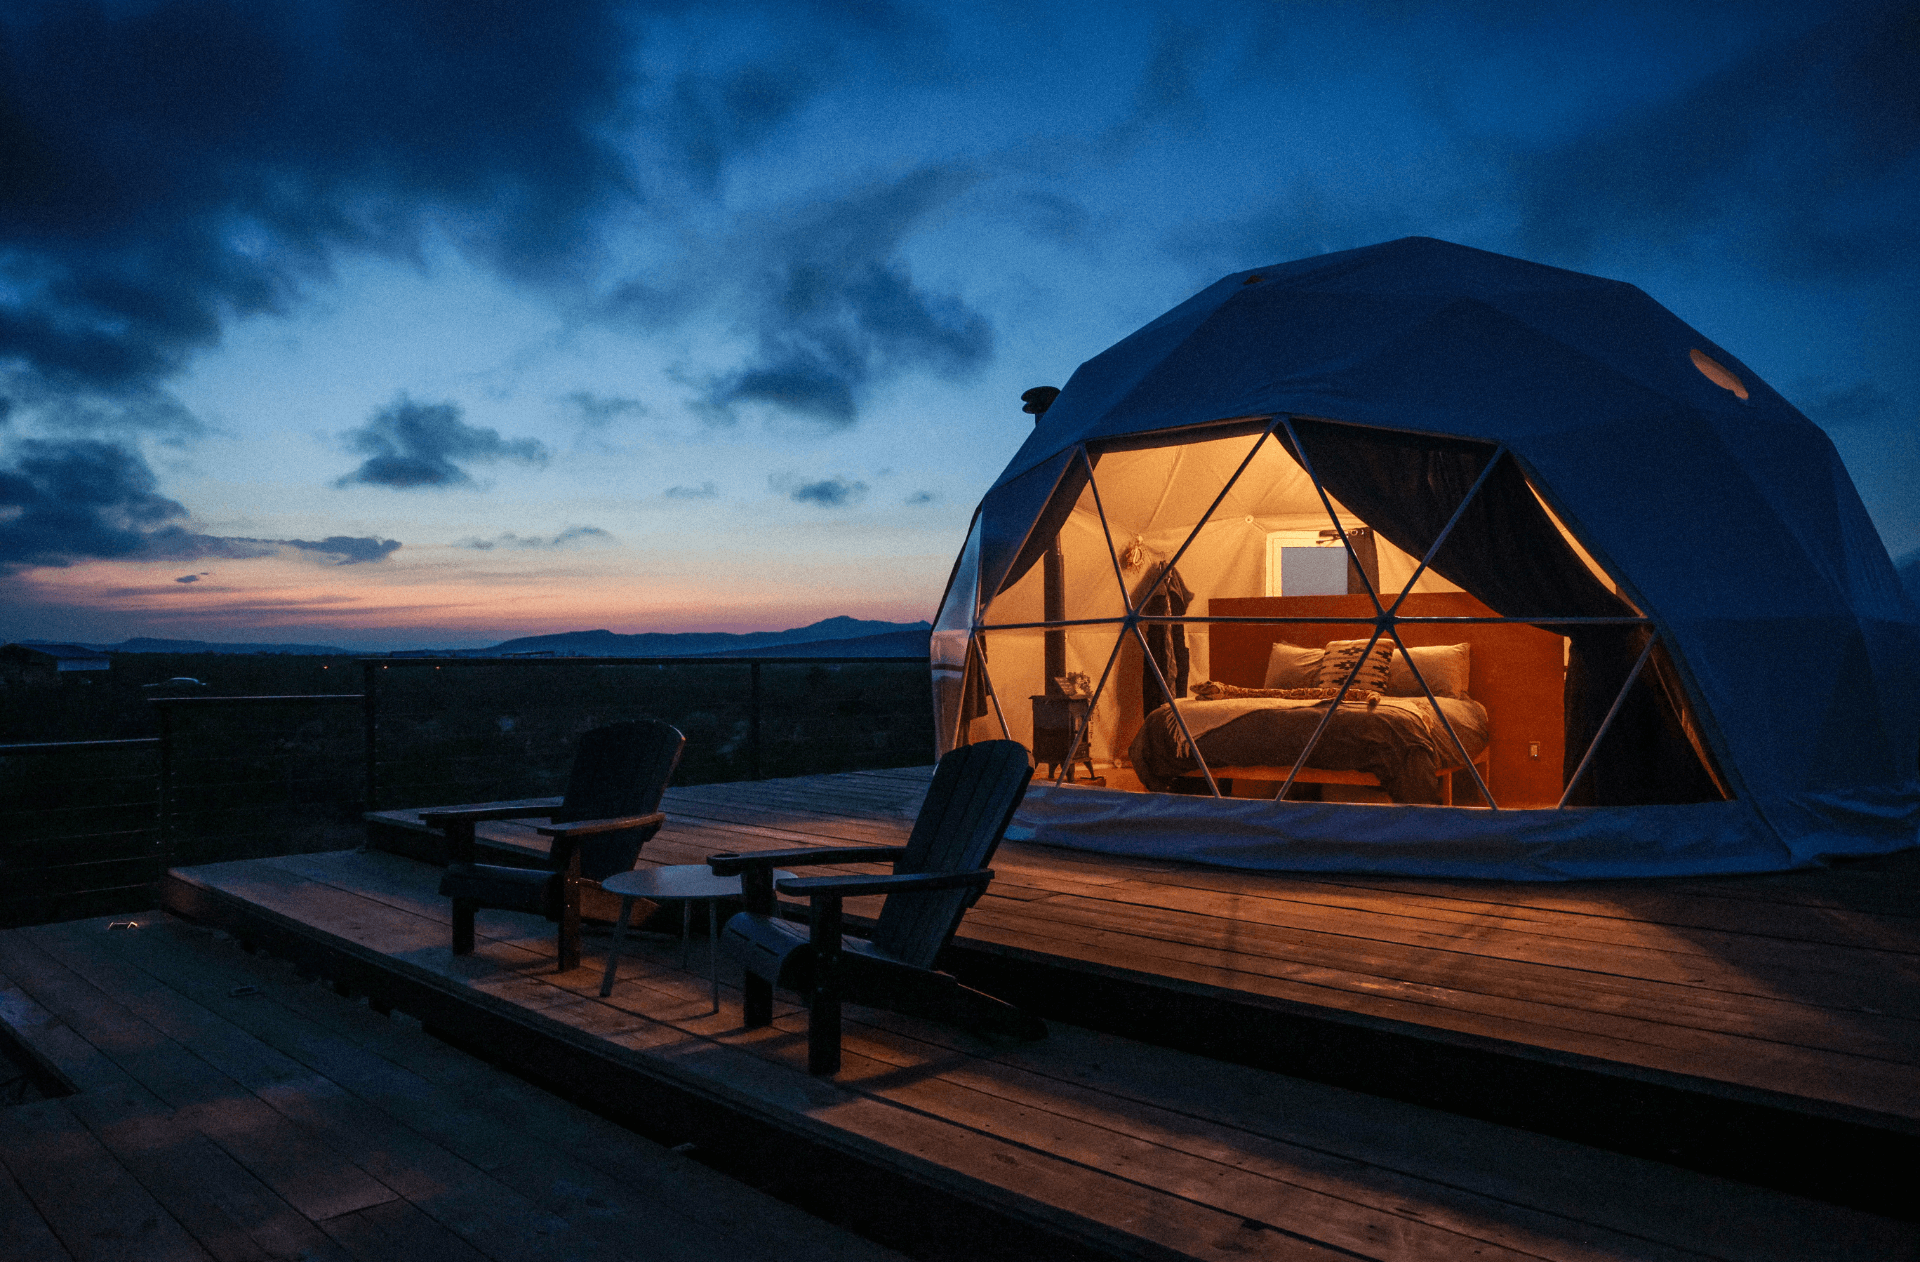 geodesic dome on wooden deck at night